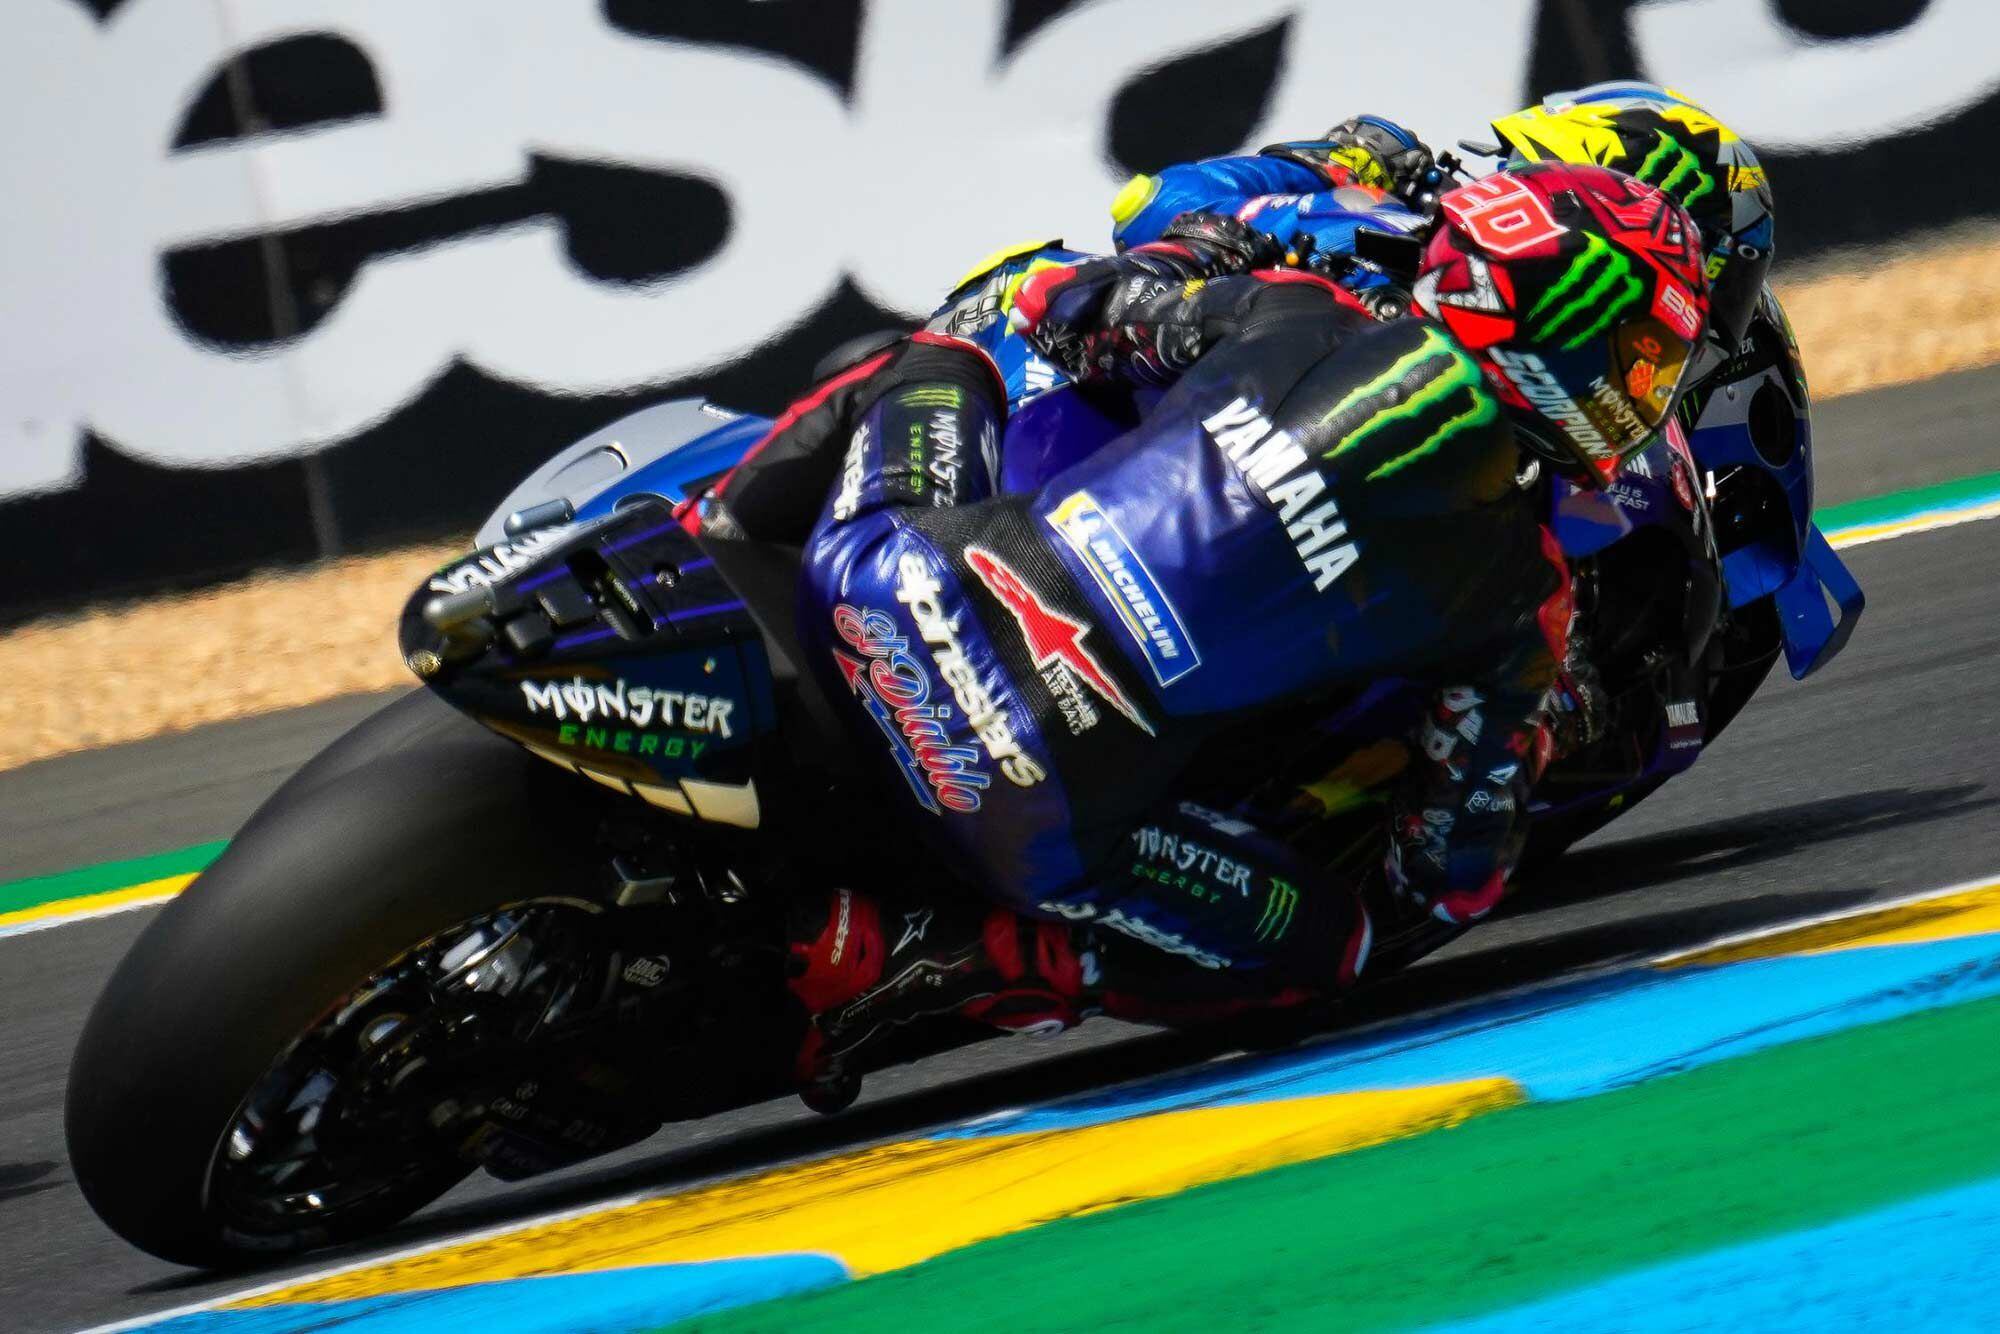 Yamaha’s Quartararo, the defending world champion, still holds the lead in the series, but he’s dogged closely by Aprilia’s Aleix Espargaró and Ducati’s Bastianini. At Le Mans he finished fourth, but at least he finished.